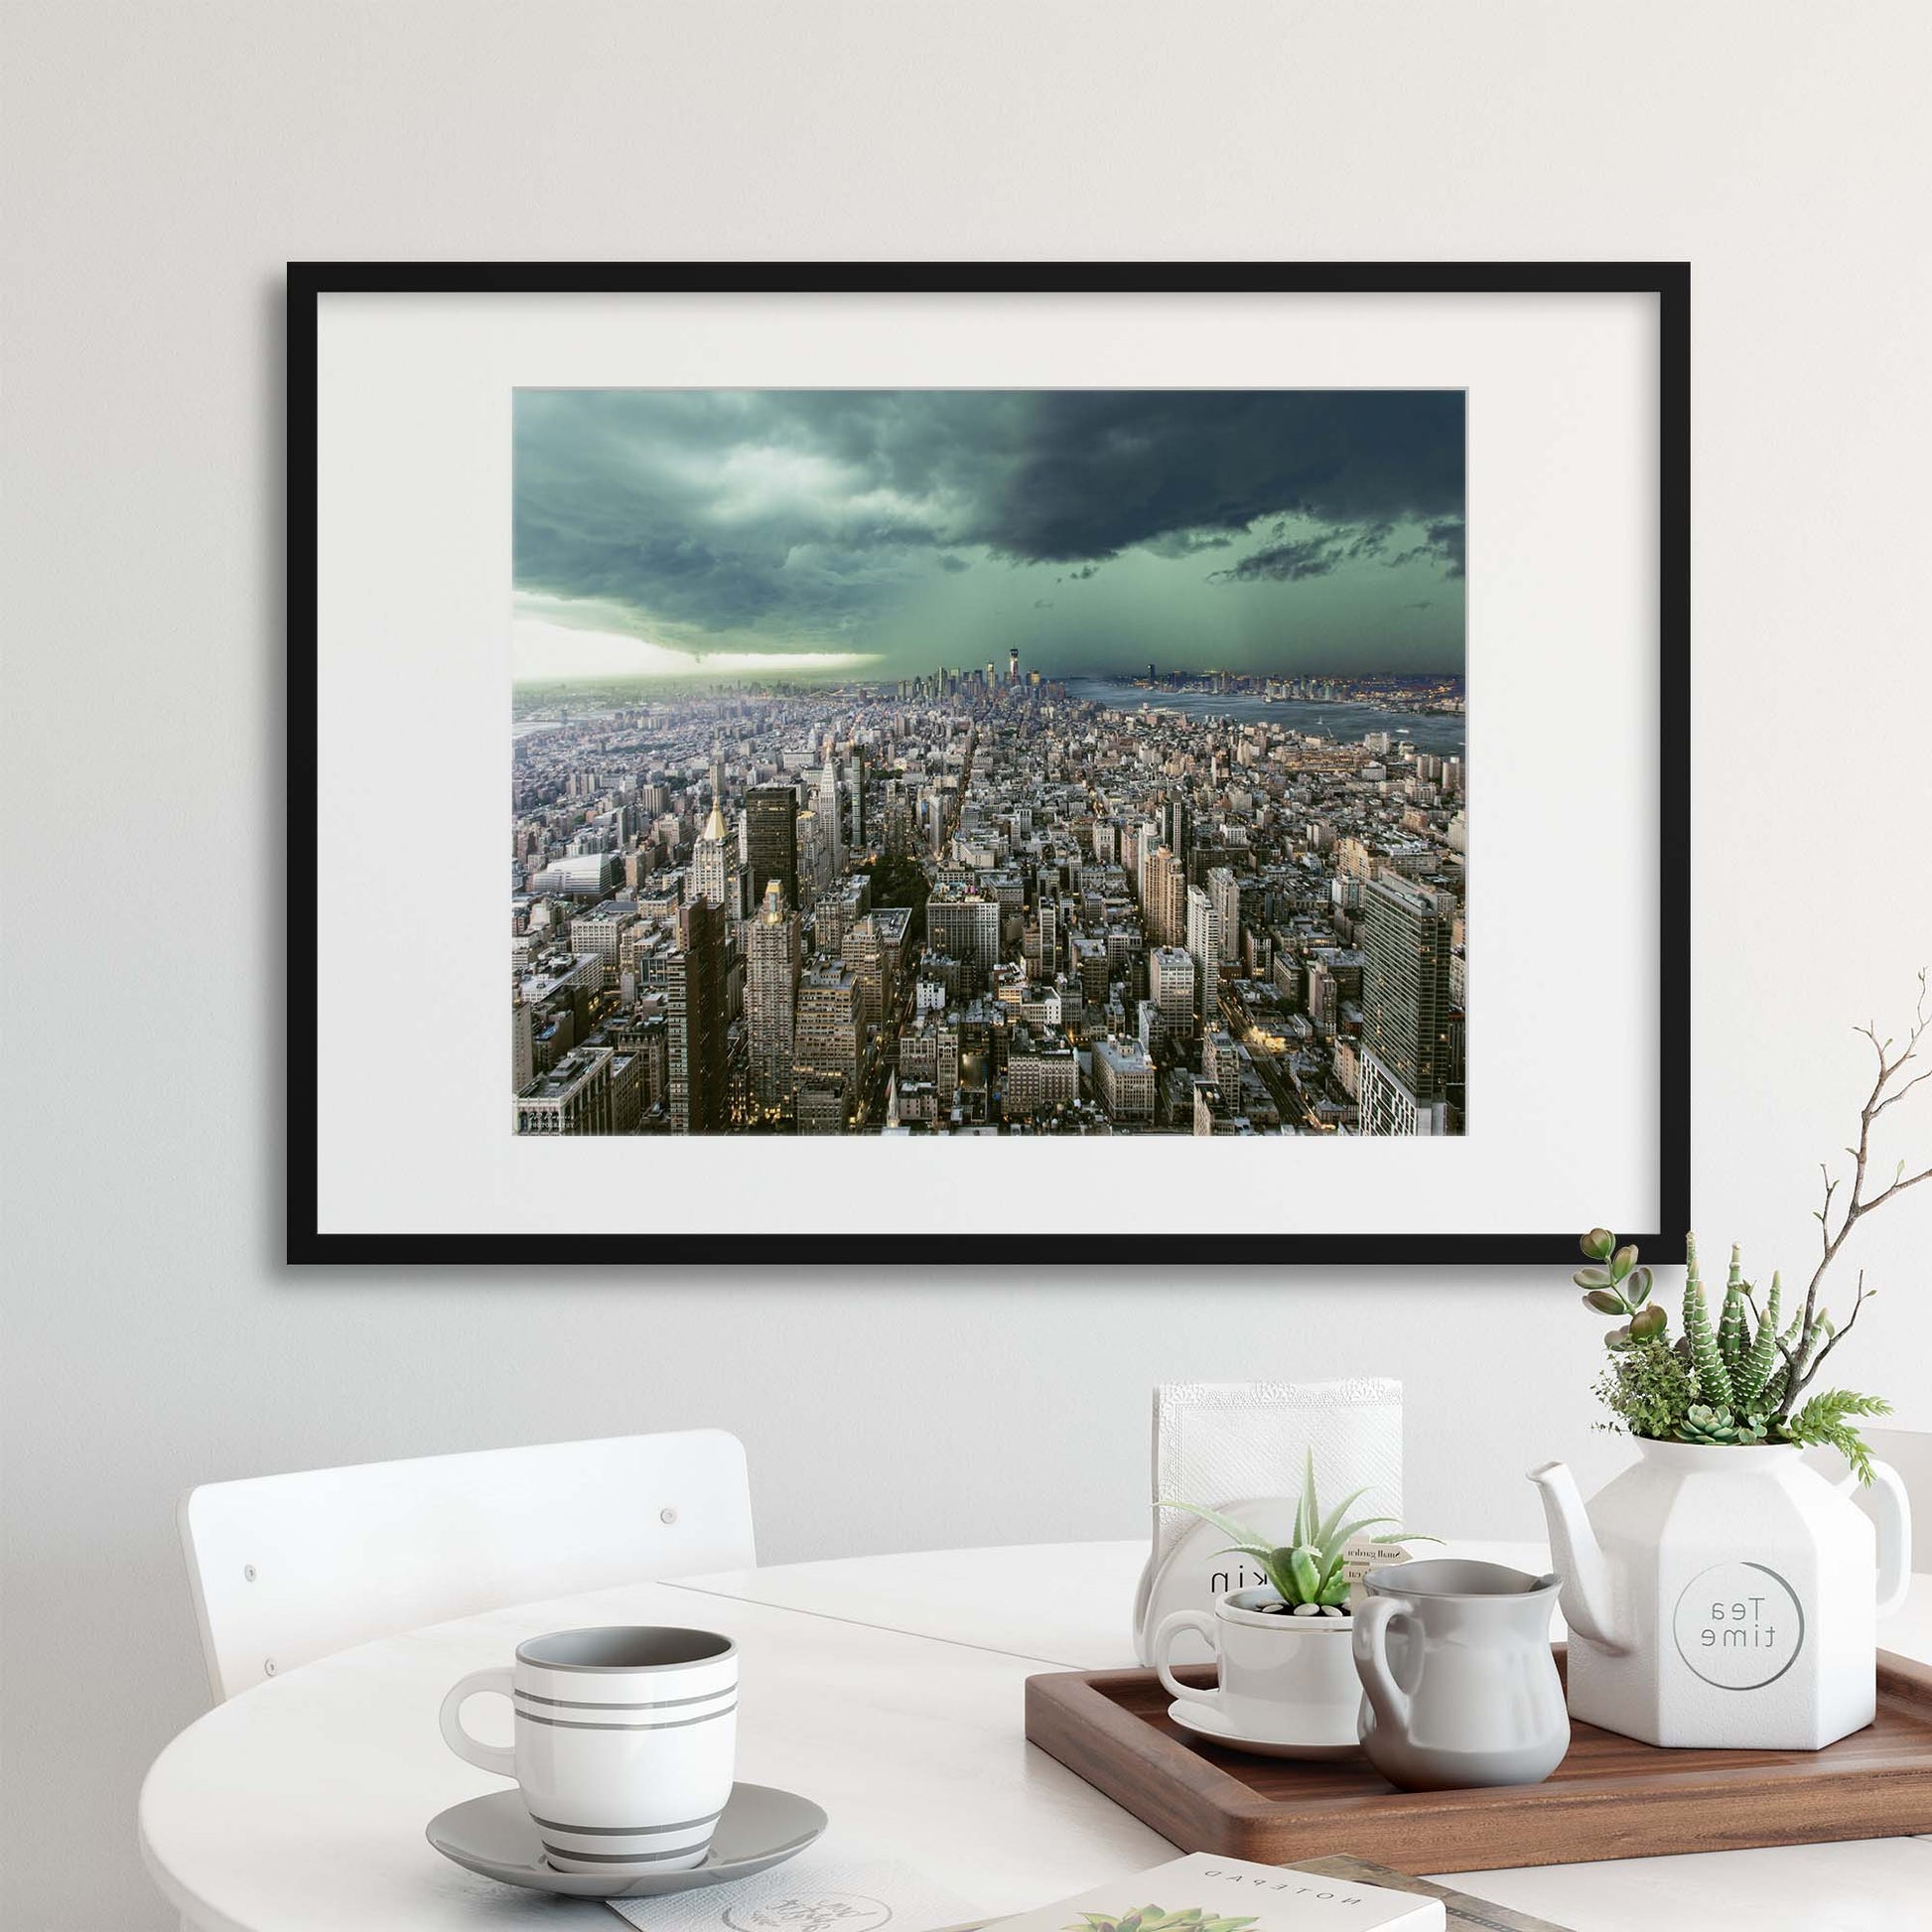 New-York under storm by Pagniez Framed Print - USTAD HOME